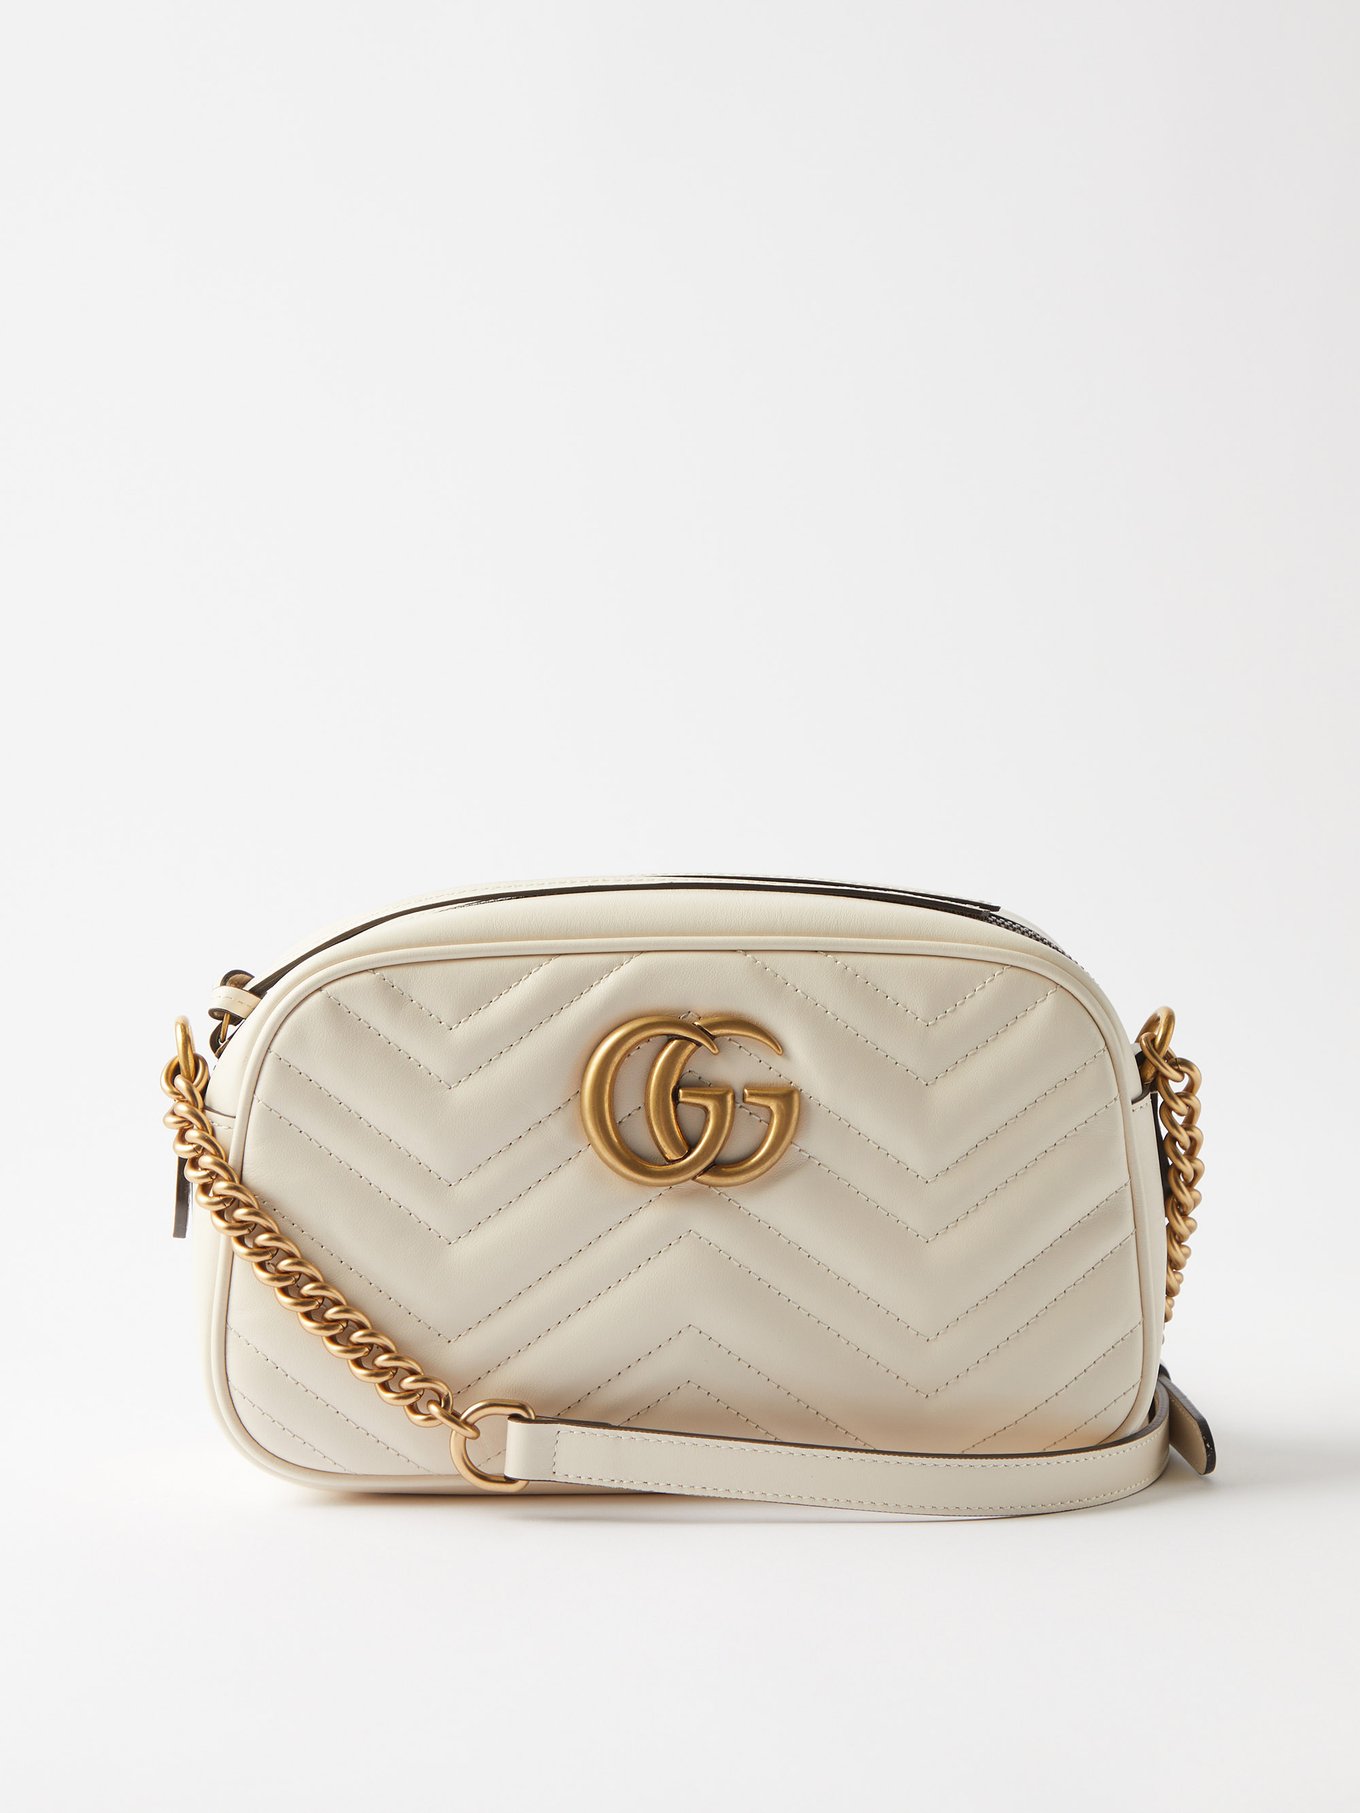 GG Marmont mini bag in white leather